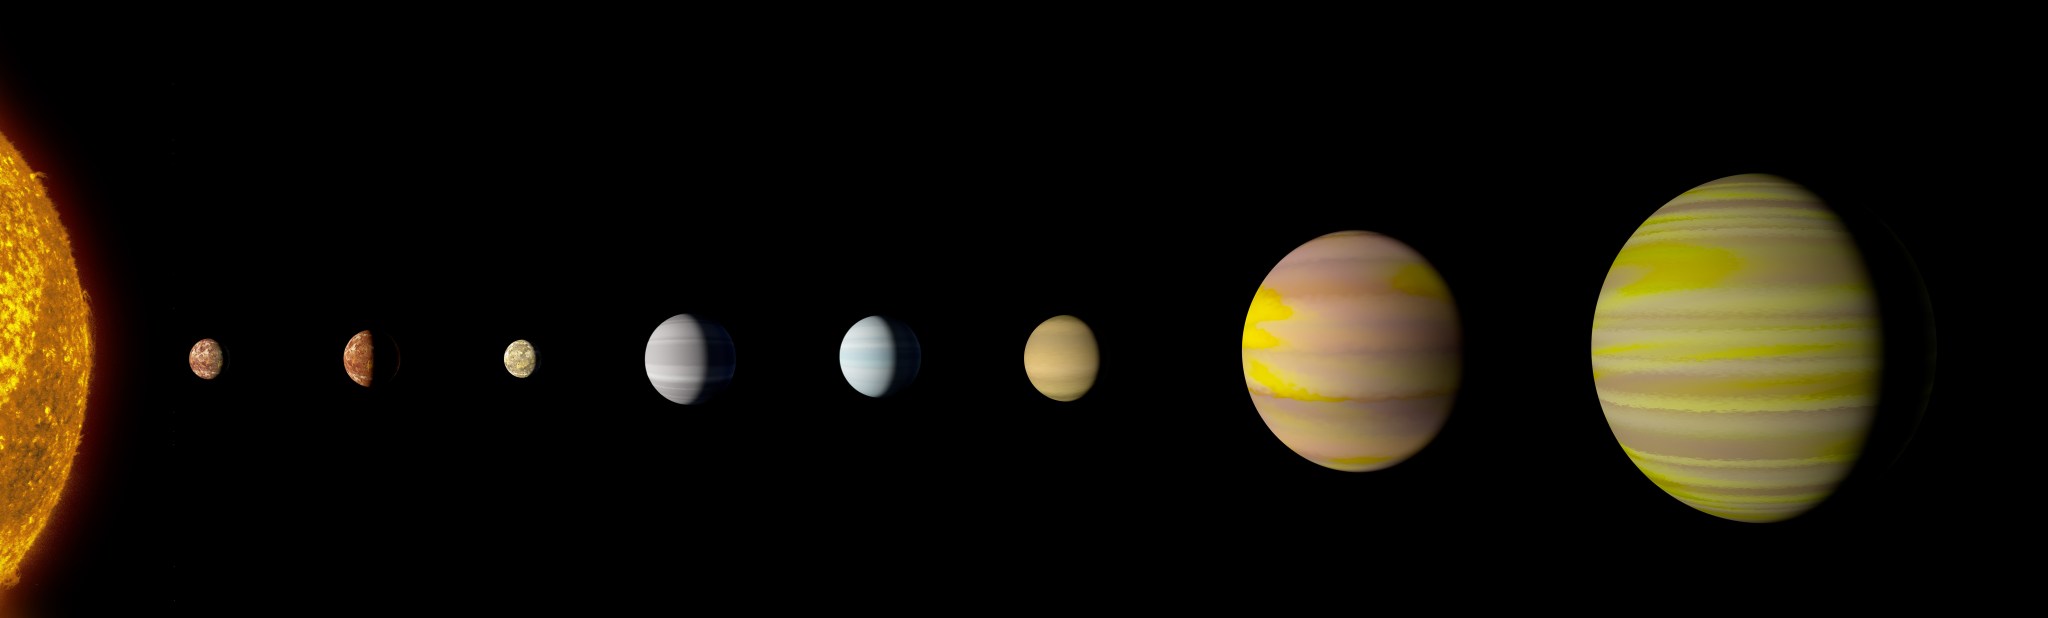 The Kepler-90 system is the first to tie with our solar system in number of planets.